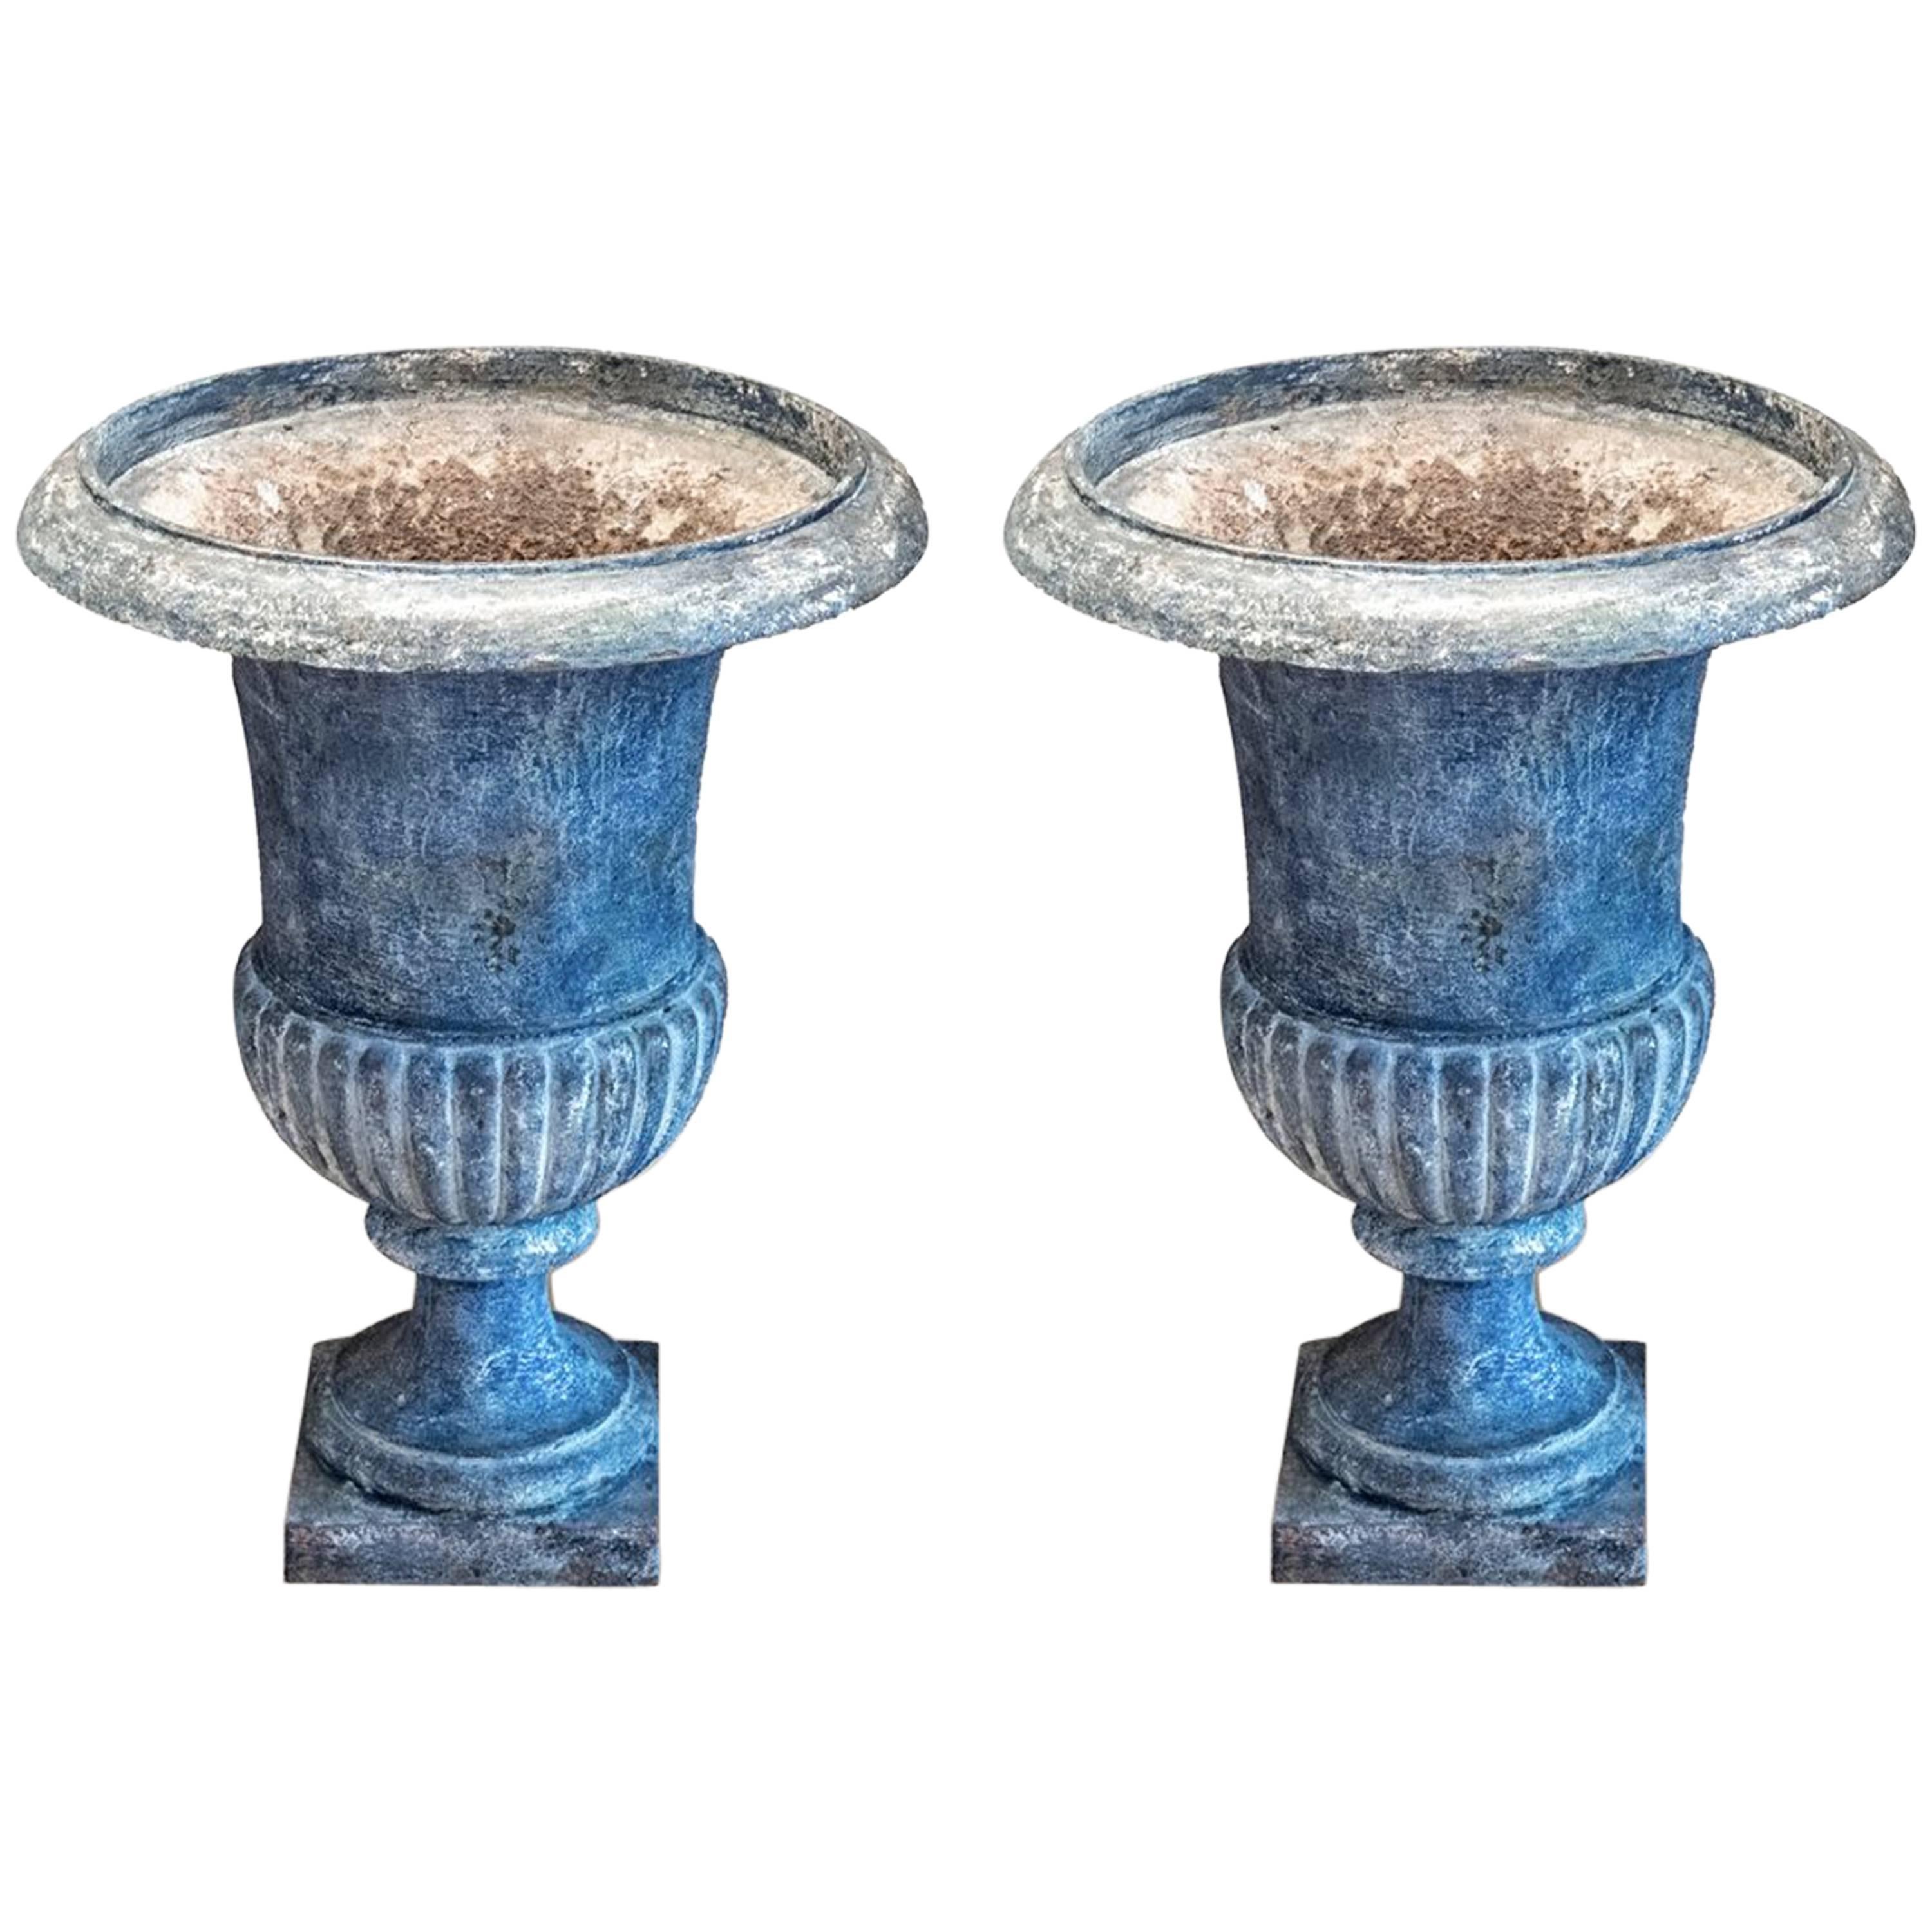 Pair of Medici Urns with New Paint